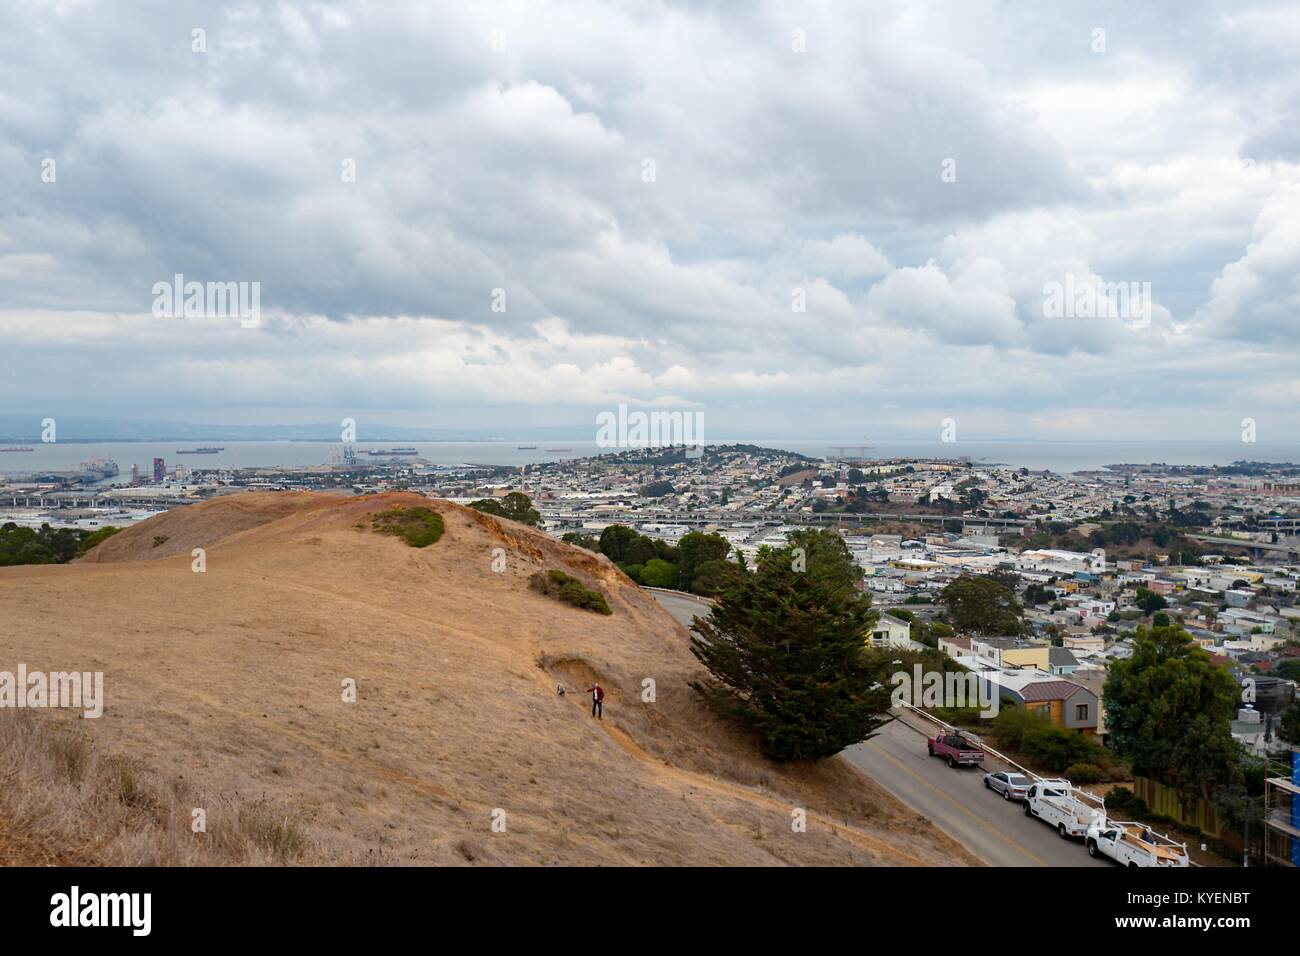 View of Bernal Heights Park, as well as aerial views of the Dogpatch, Hunters Point and Mission Bay neighborhoods of San Francisco, California on an overcast day, November 3, 2017. () Stock Photo